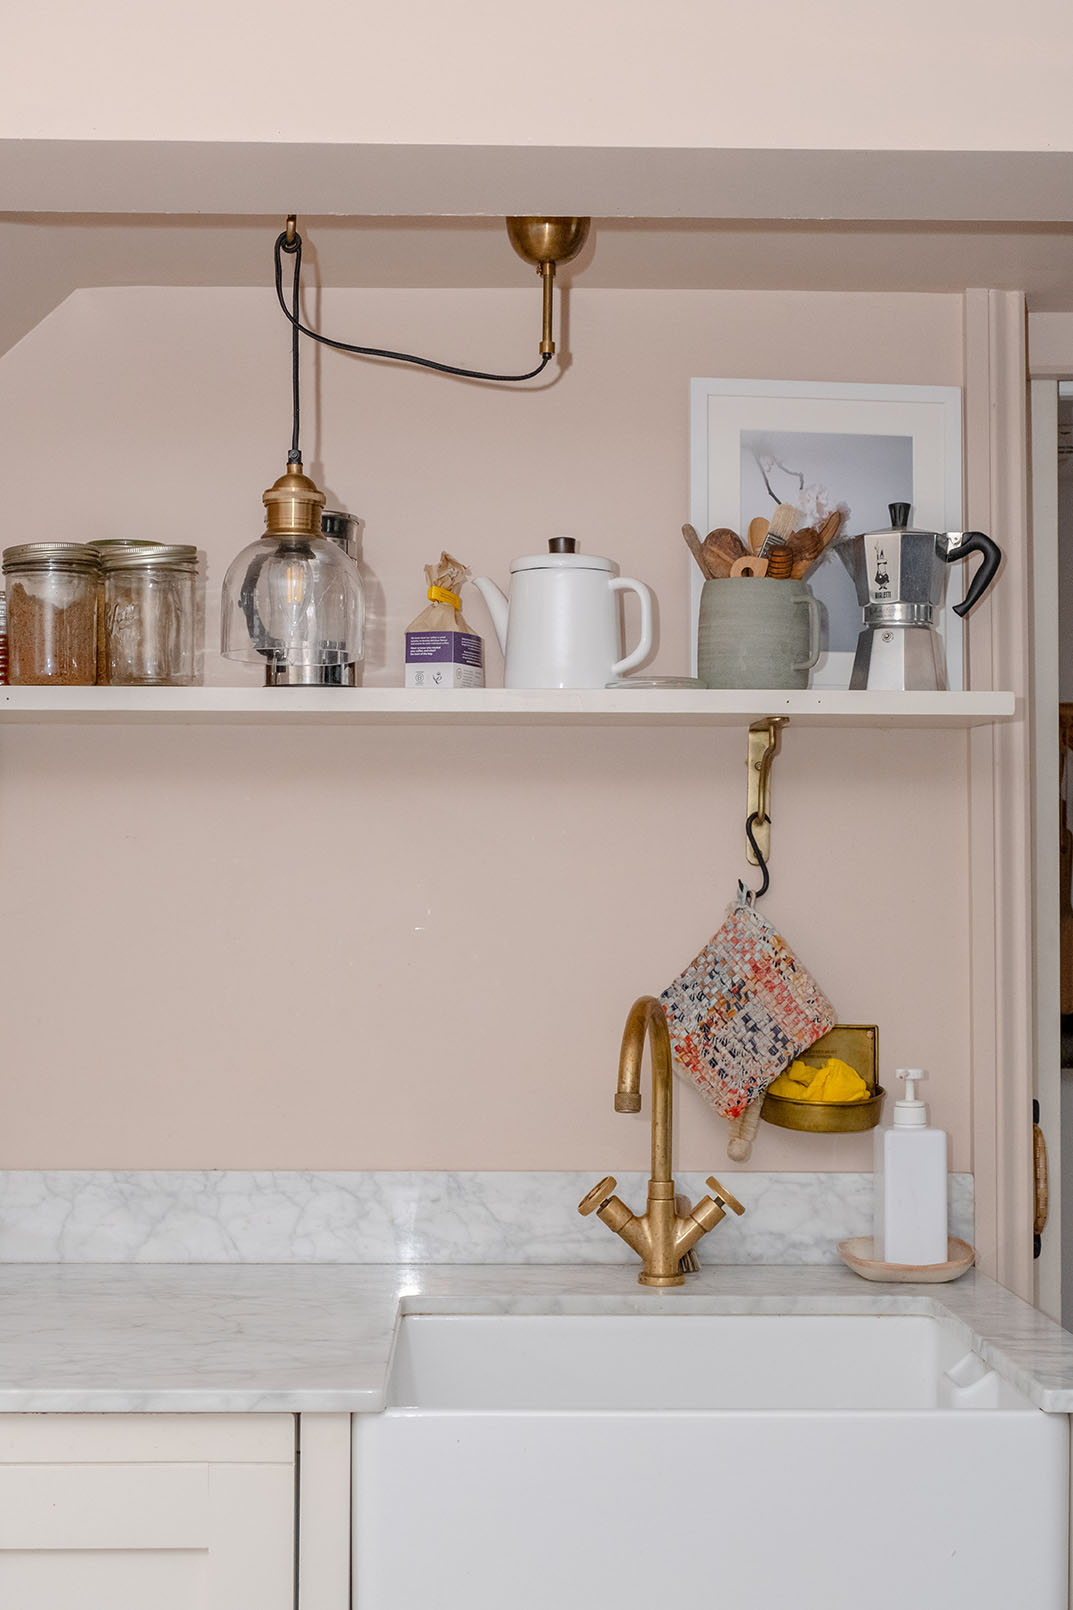 Close up shot of a kitchen sink area with a shelf on the wall and some kitchen items on it, taken for property photography to be used on holiday letting listing.